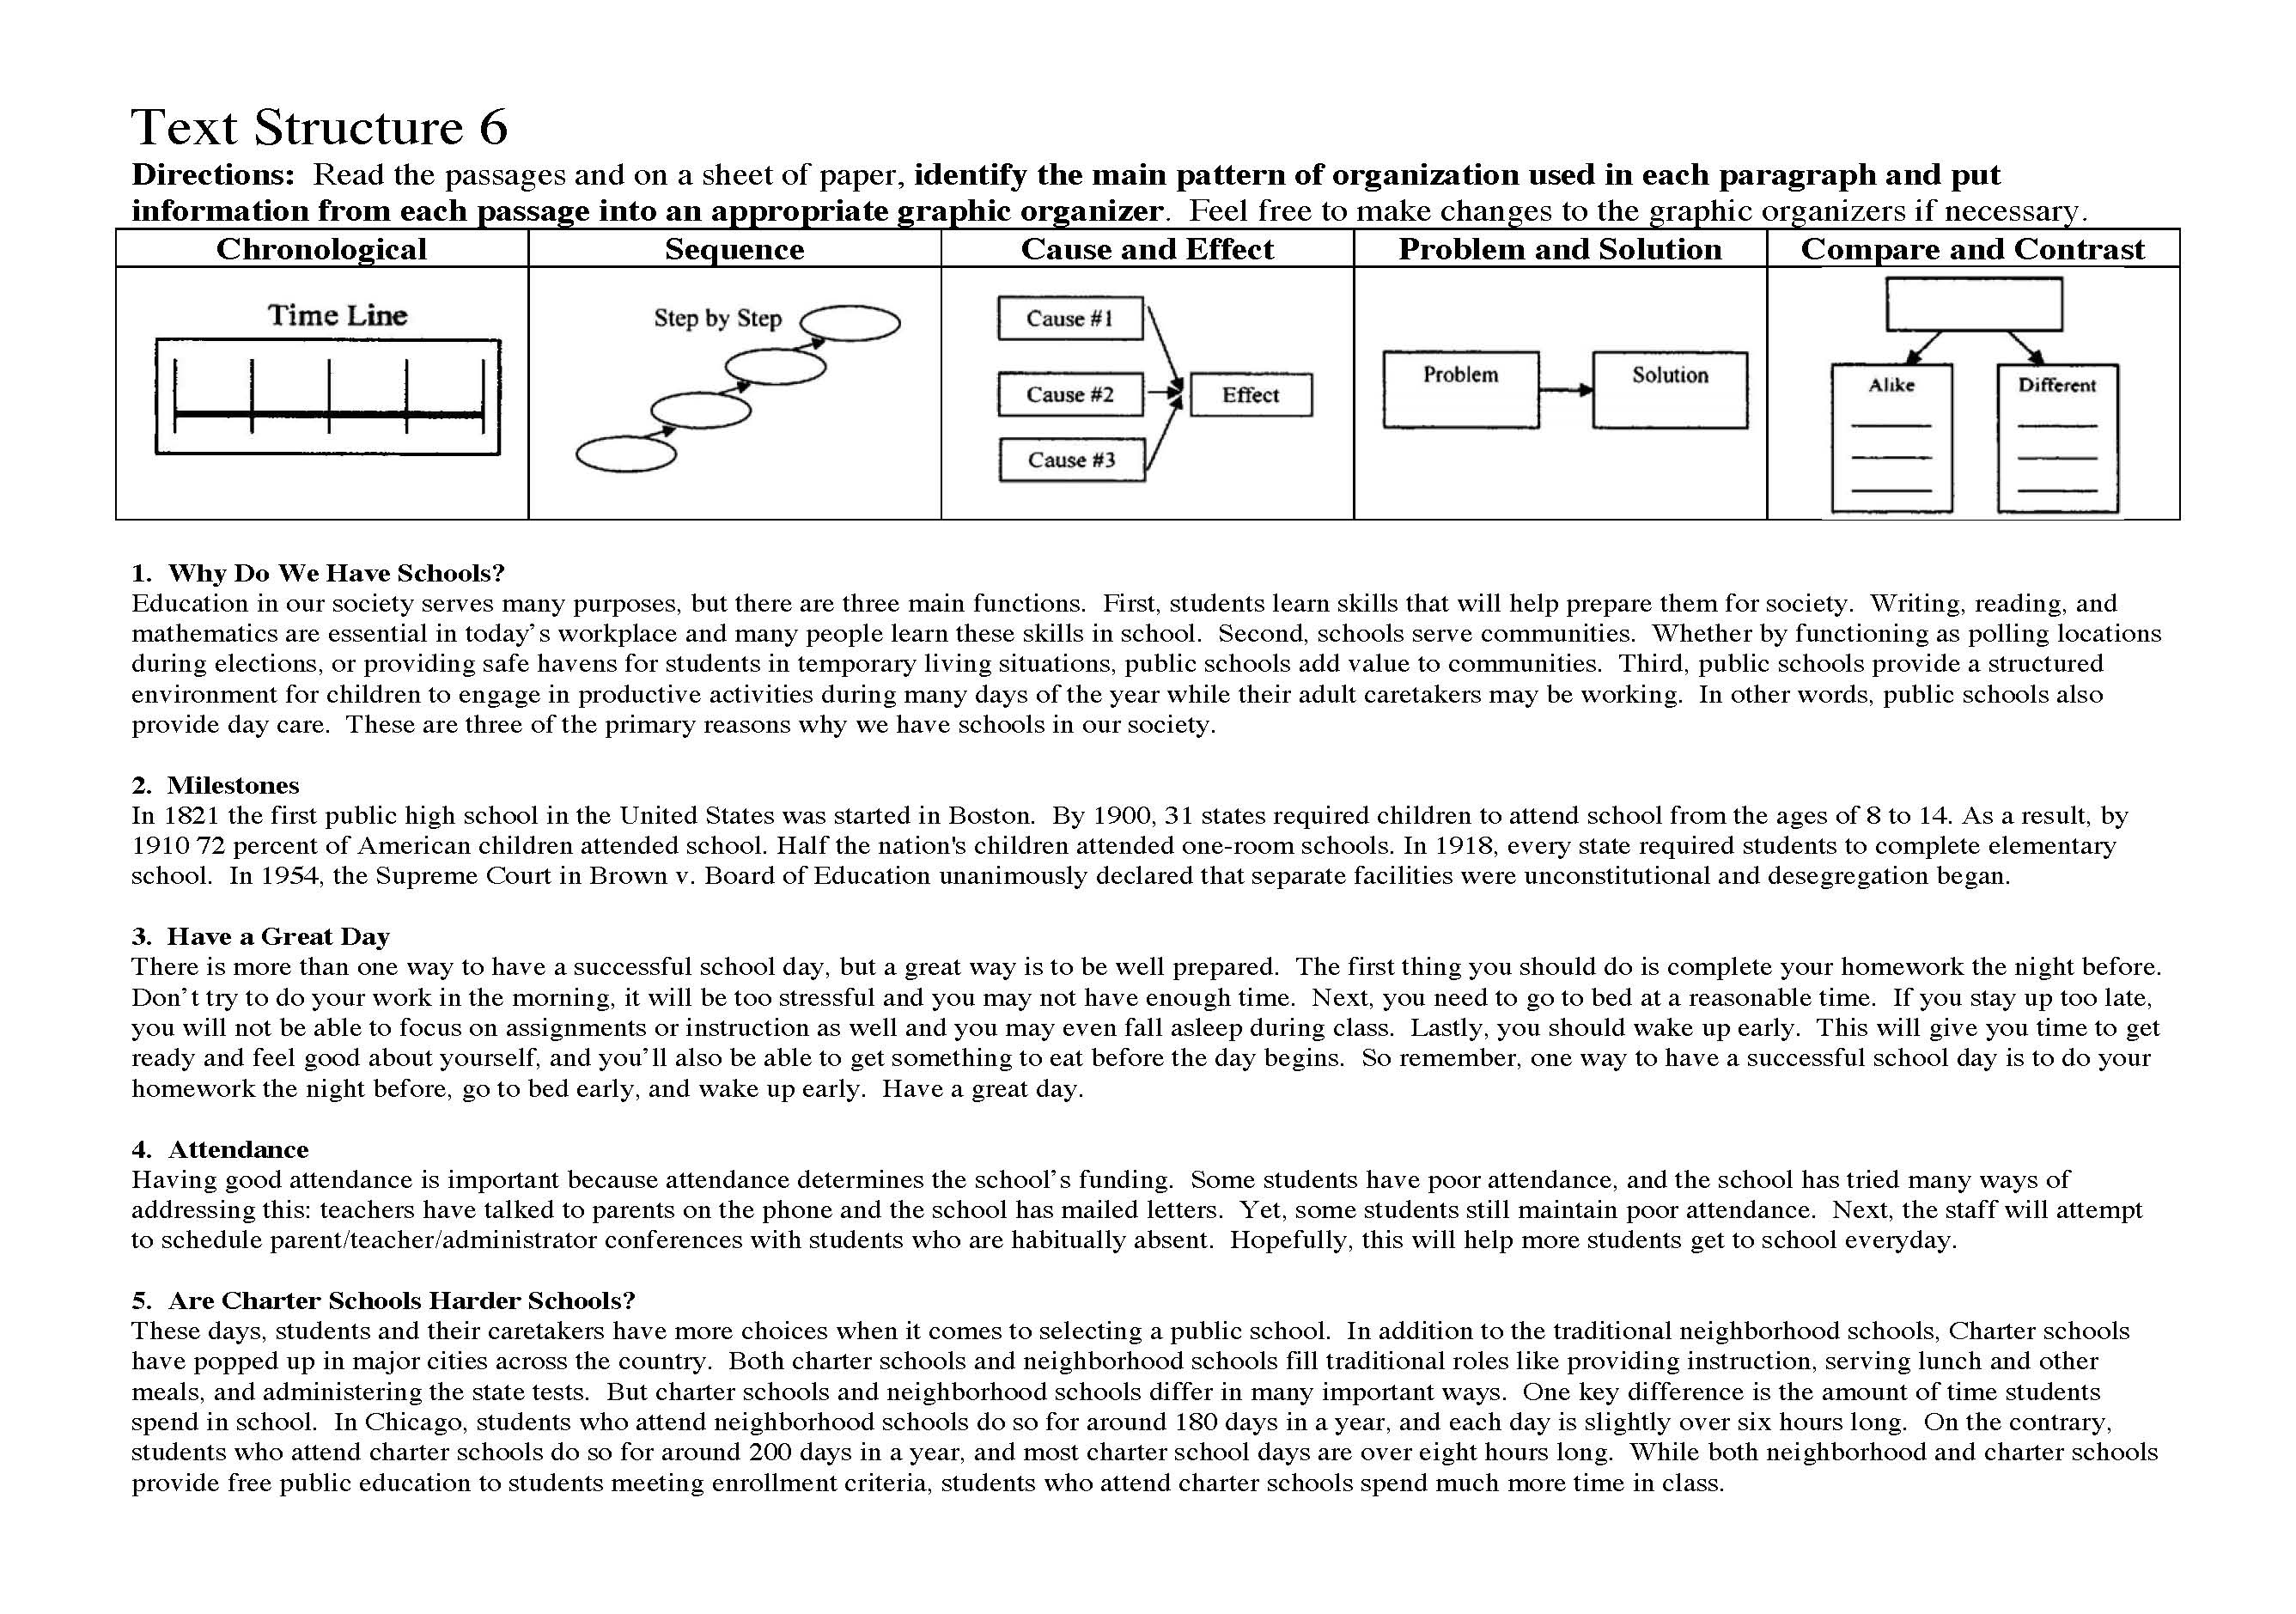 This is a preview image of Text Structure Worksheet 6. Click on it to enlarge it or view the source file.